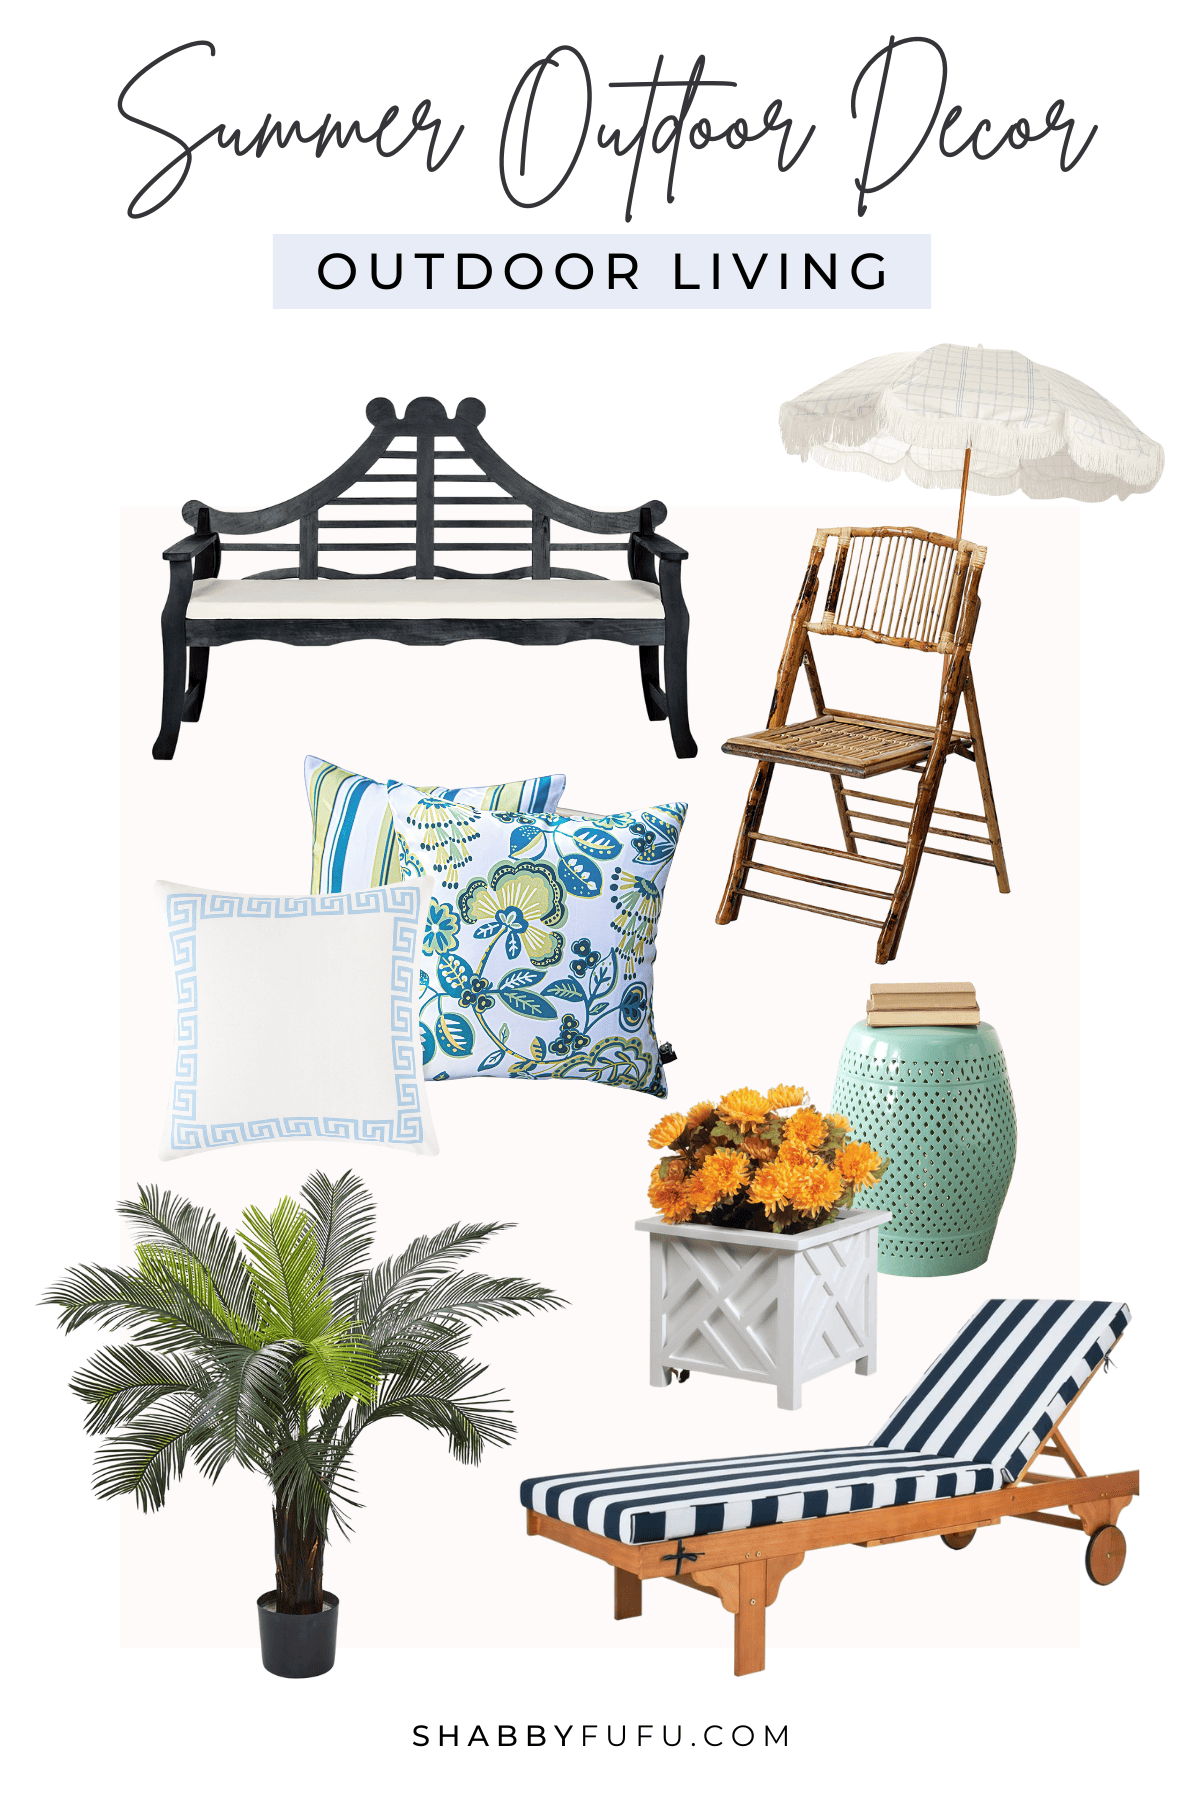 collage image of outdoor summer decor products